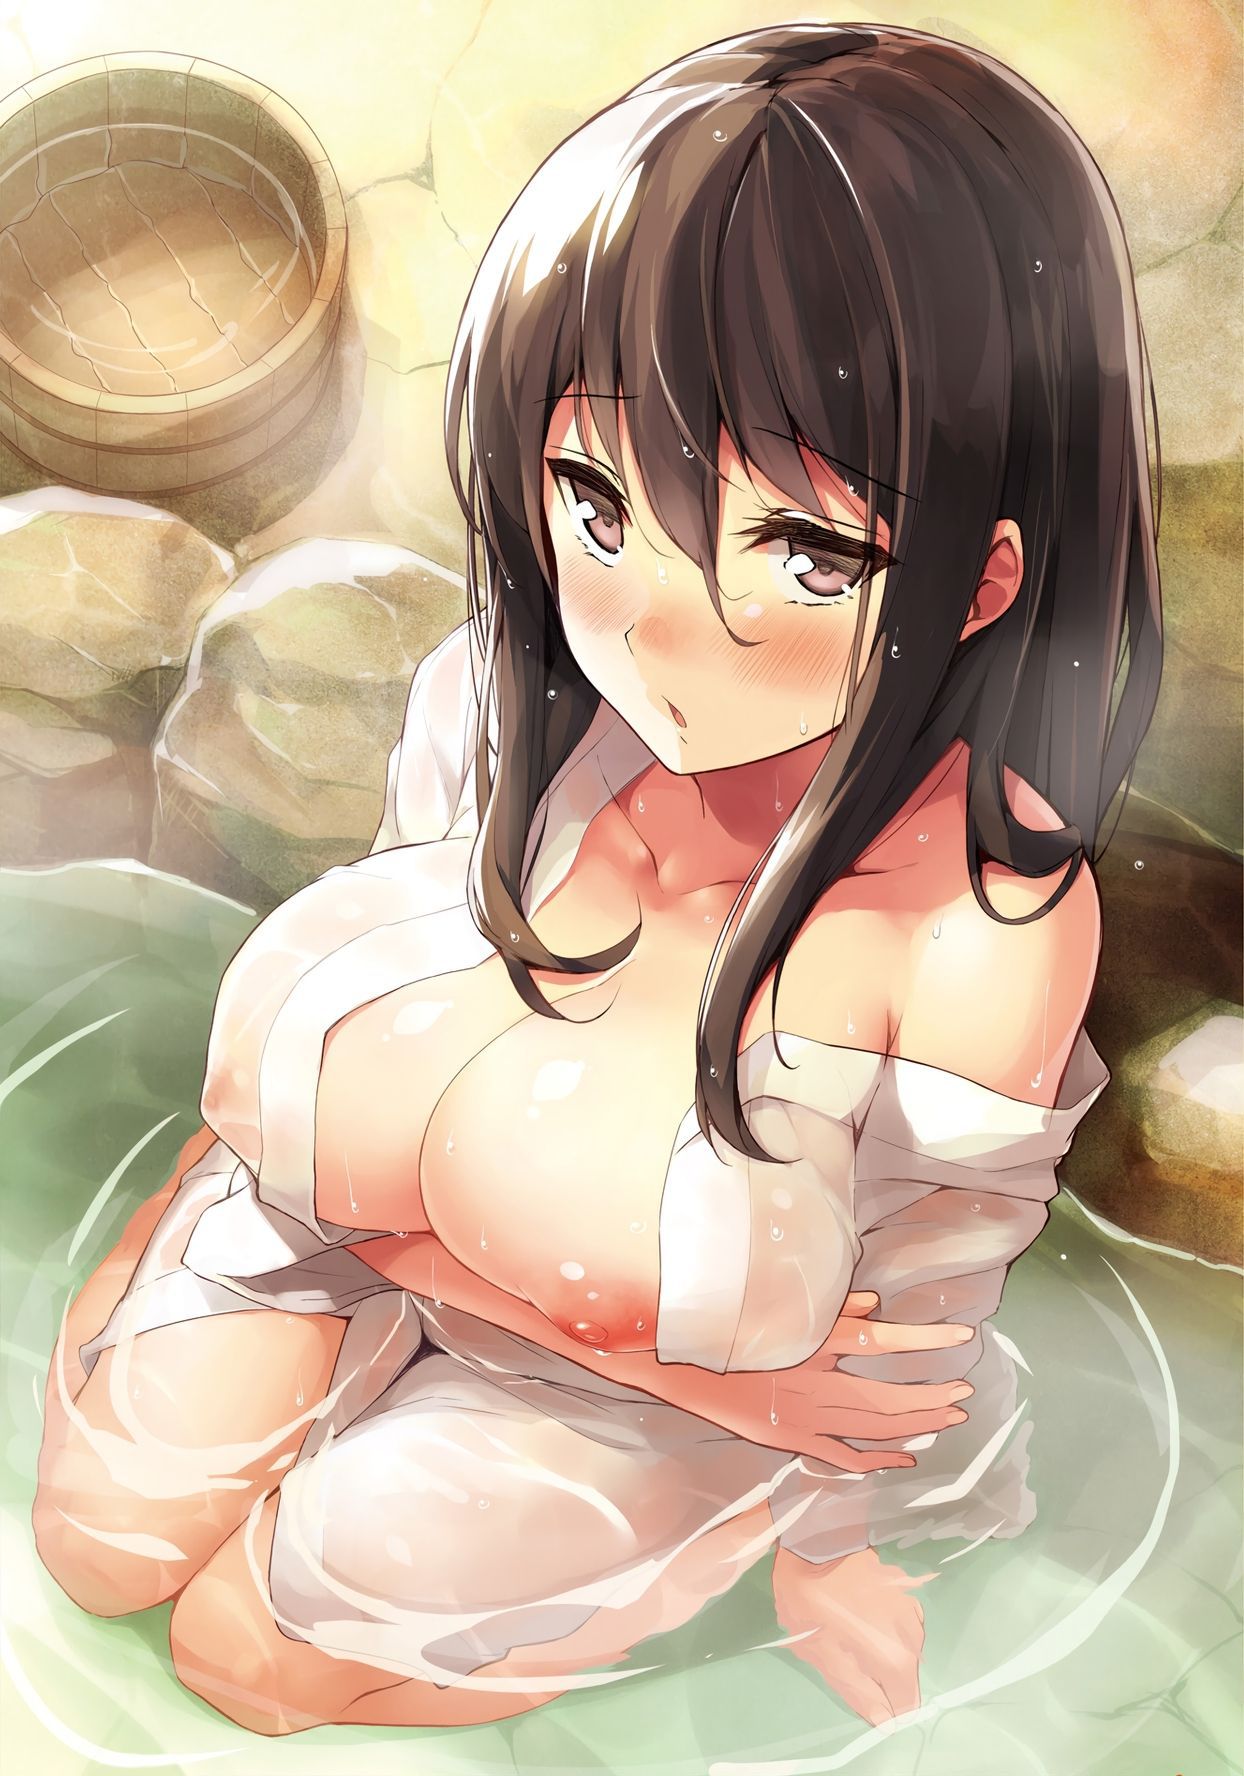 Summary the image you want to warm up (secondary-ZIP) pretty girls in bath 28